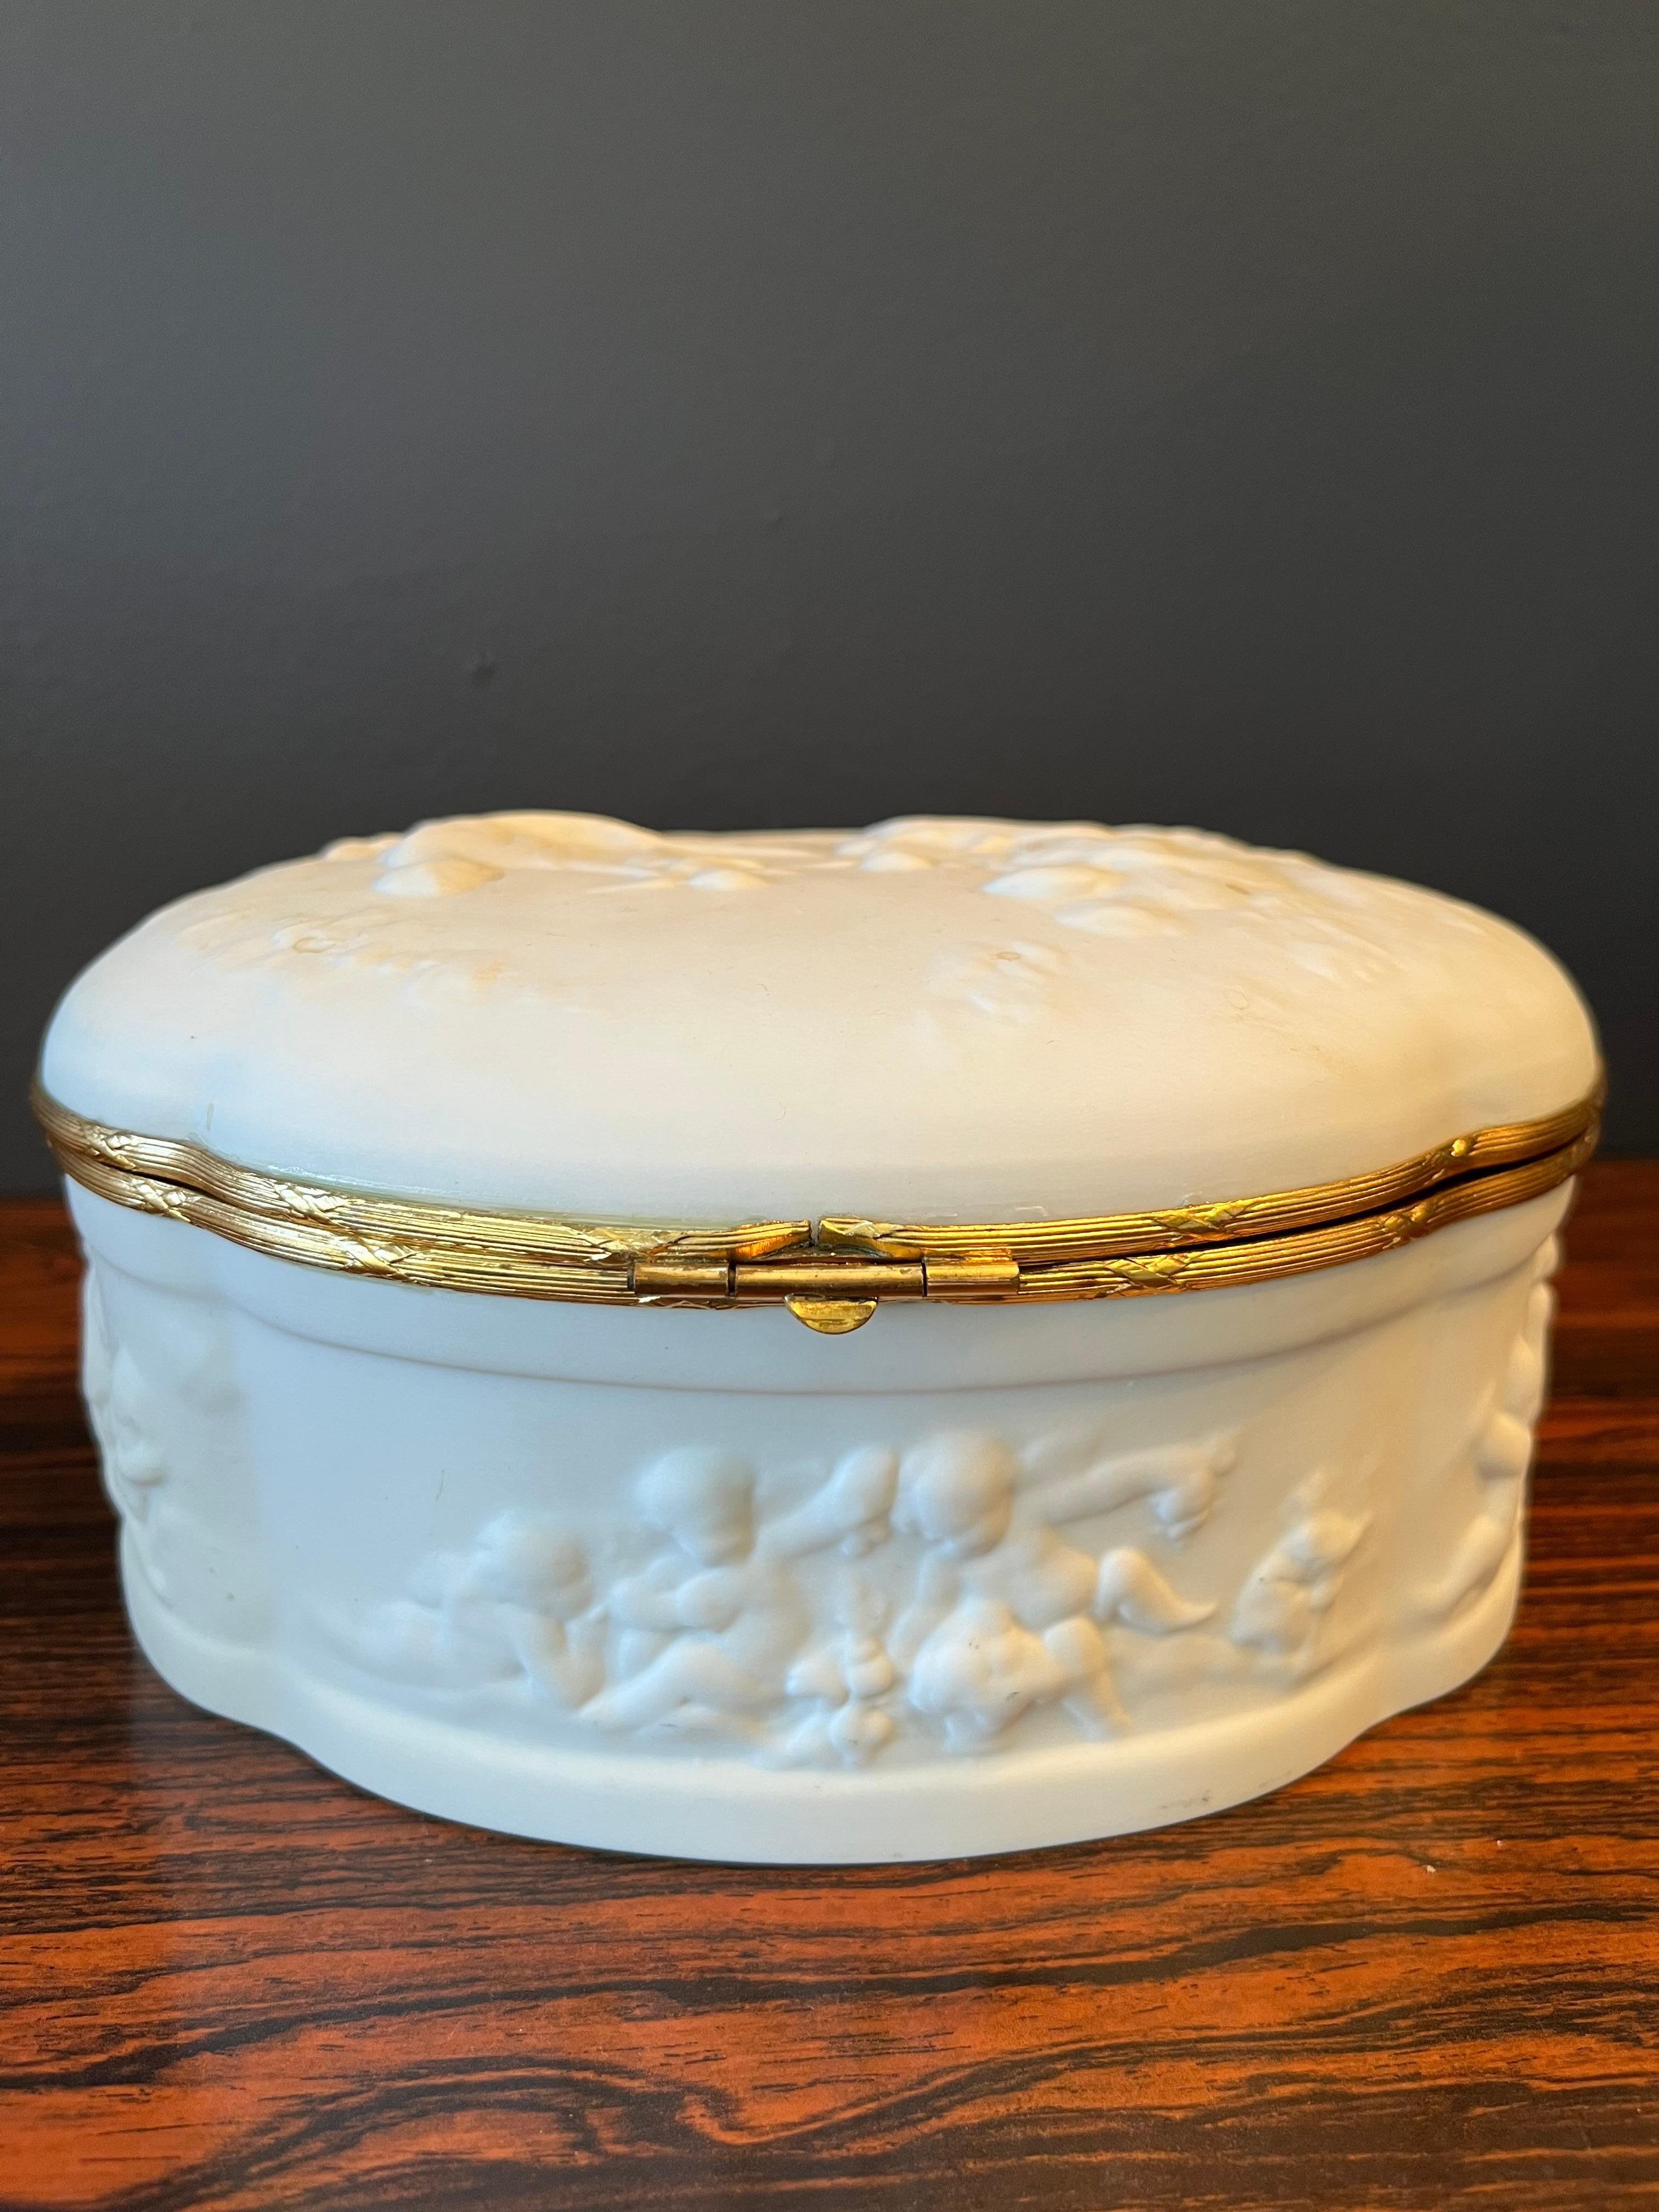 Vintage Limoges White Bisque Jewelry Casket In Excellent Condition For Sale In Mt Kisco, NY